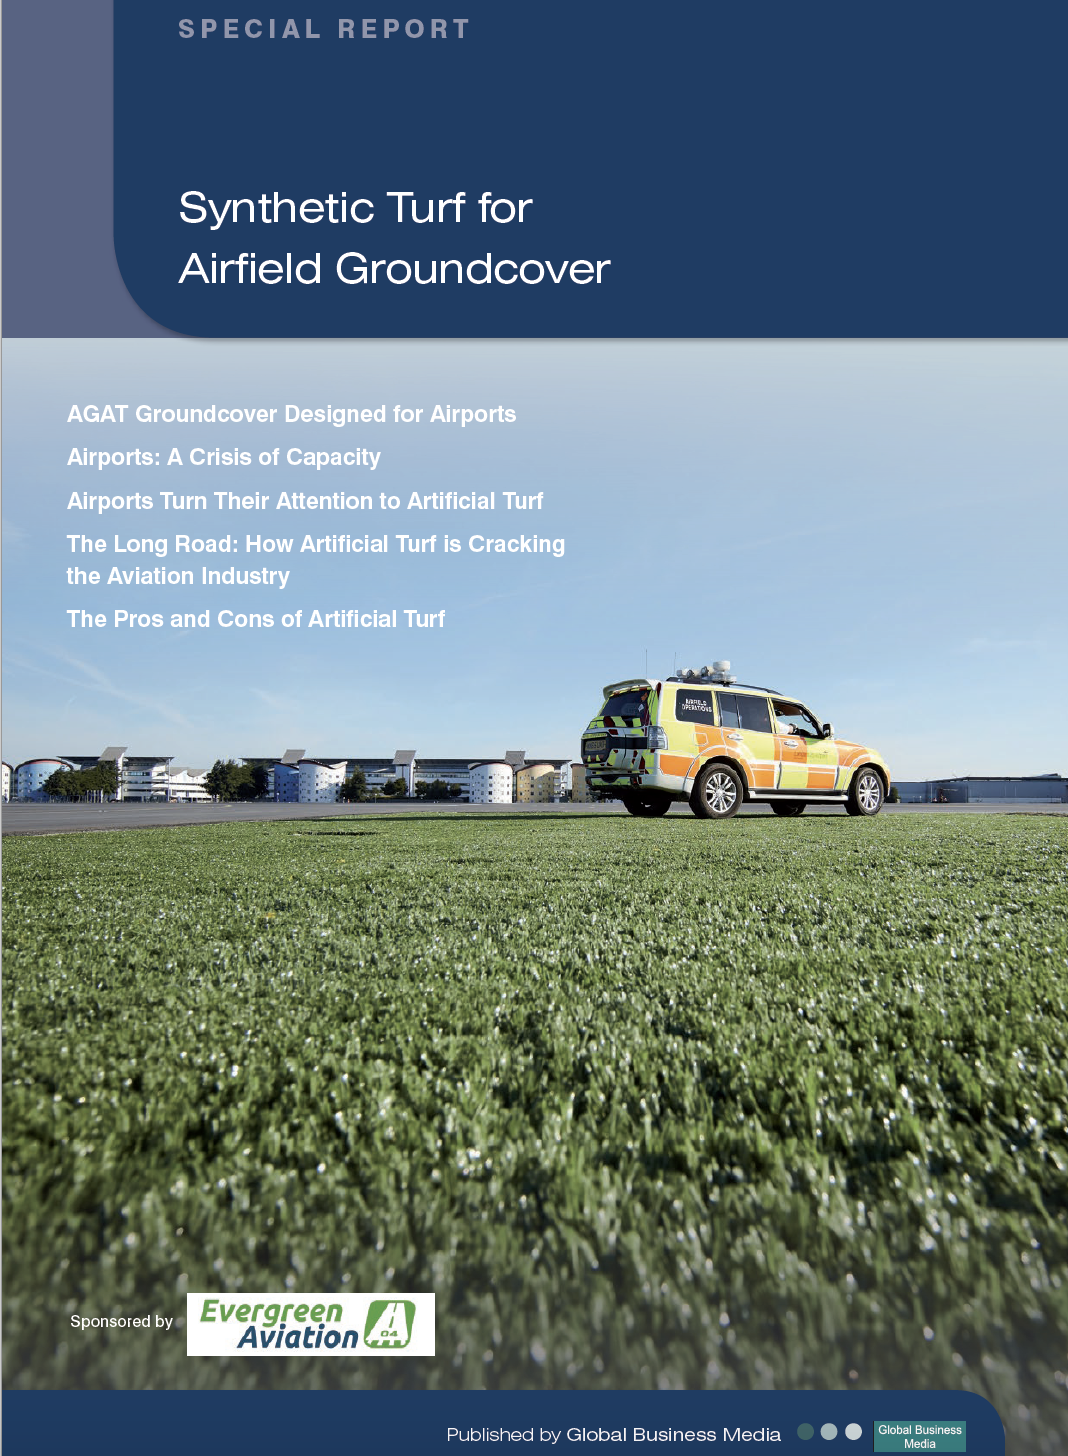 Special Report-Synthetic Turf for Airfield Groundcover -Evergreen Aviation